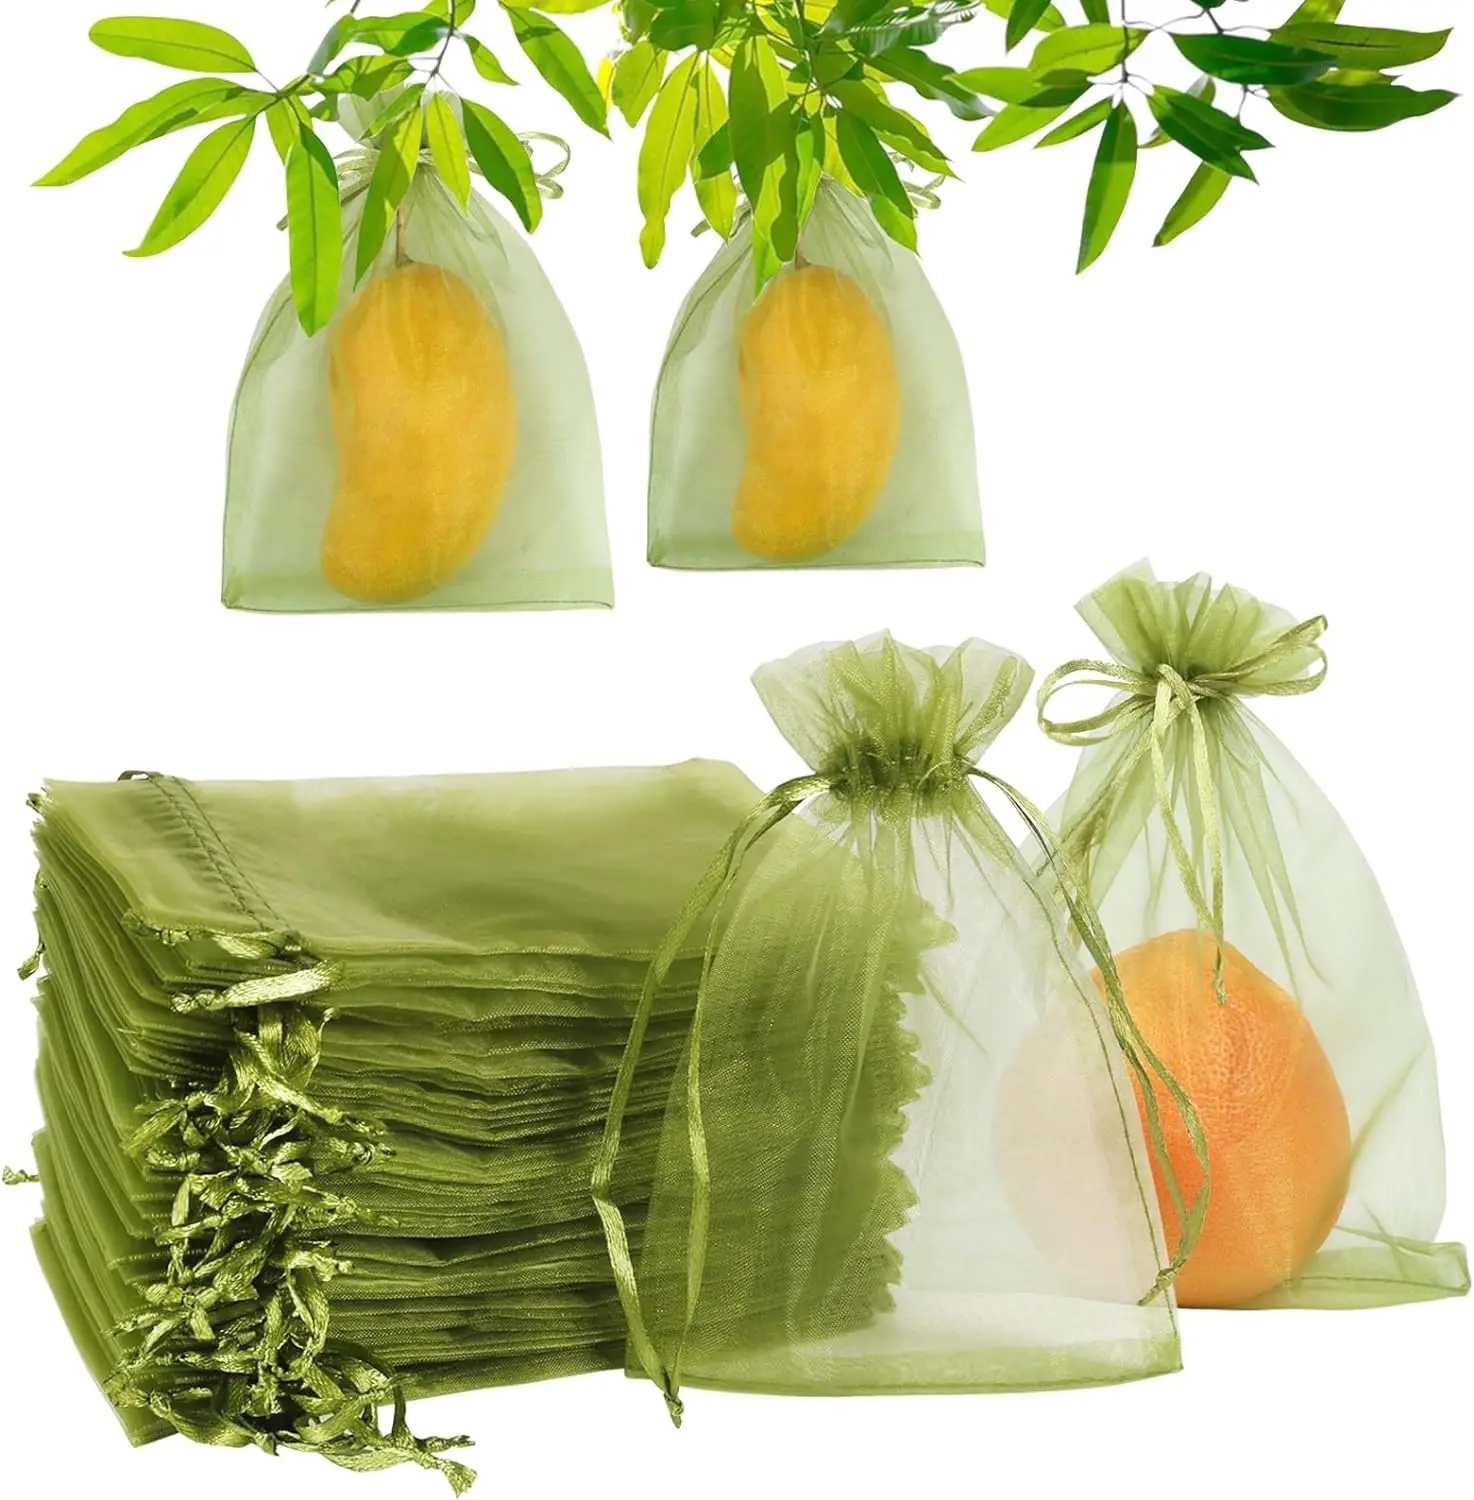 50Pcs Fruit Protection Bags Grape Fruit Netting Bags with Drawstring for Plant Fruit Trees Flower Garden Cover Mesh Bags